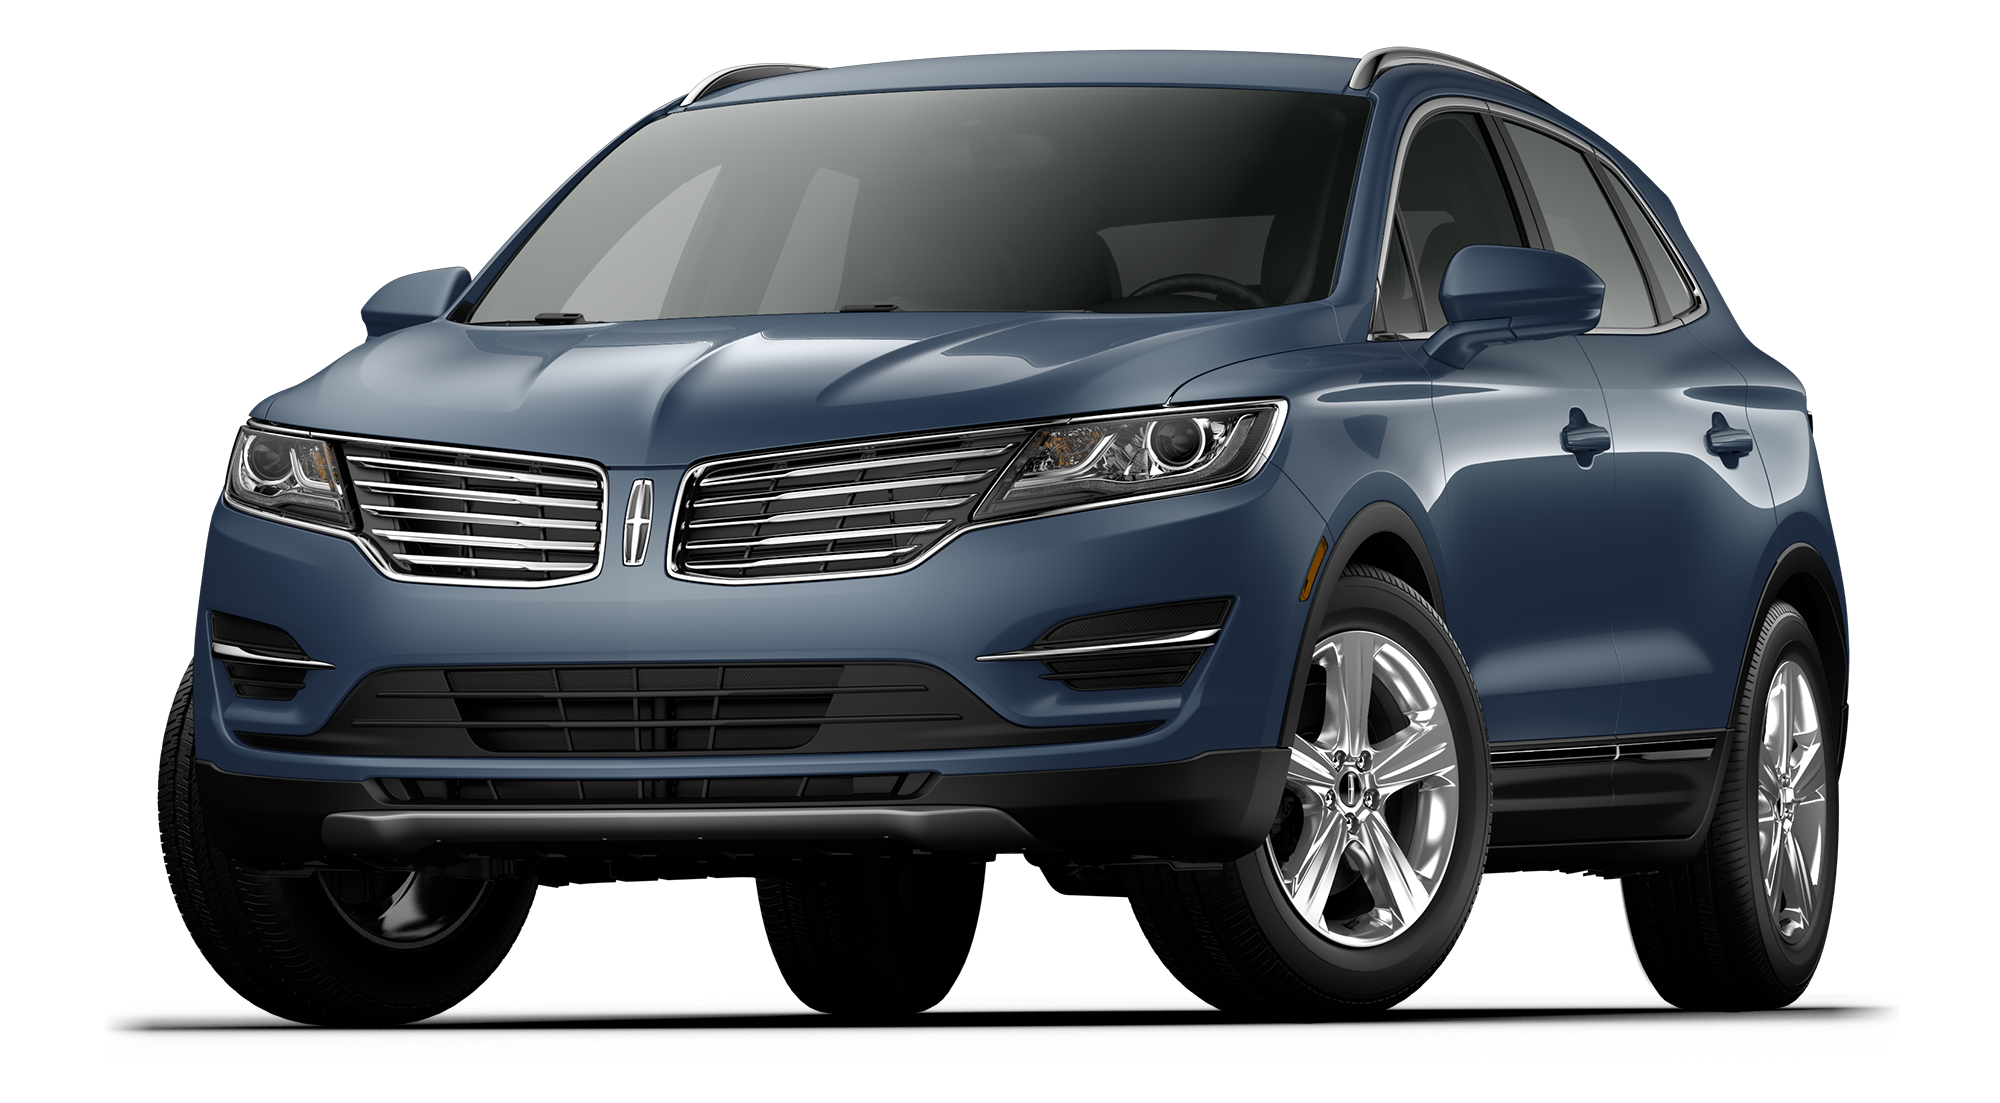 2018 Lincoln MKC Incentives, Specials & Offers in Shreveport LA